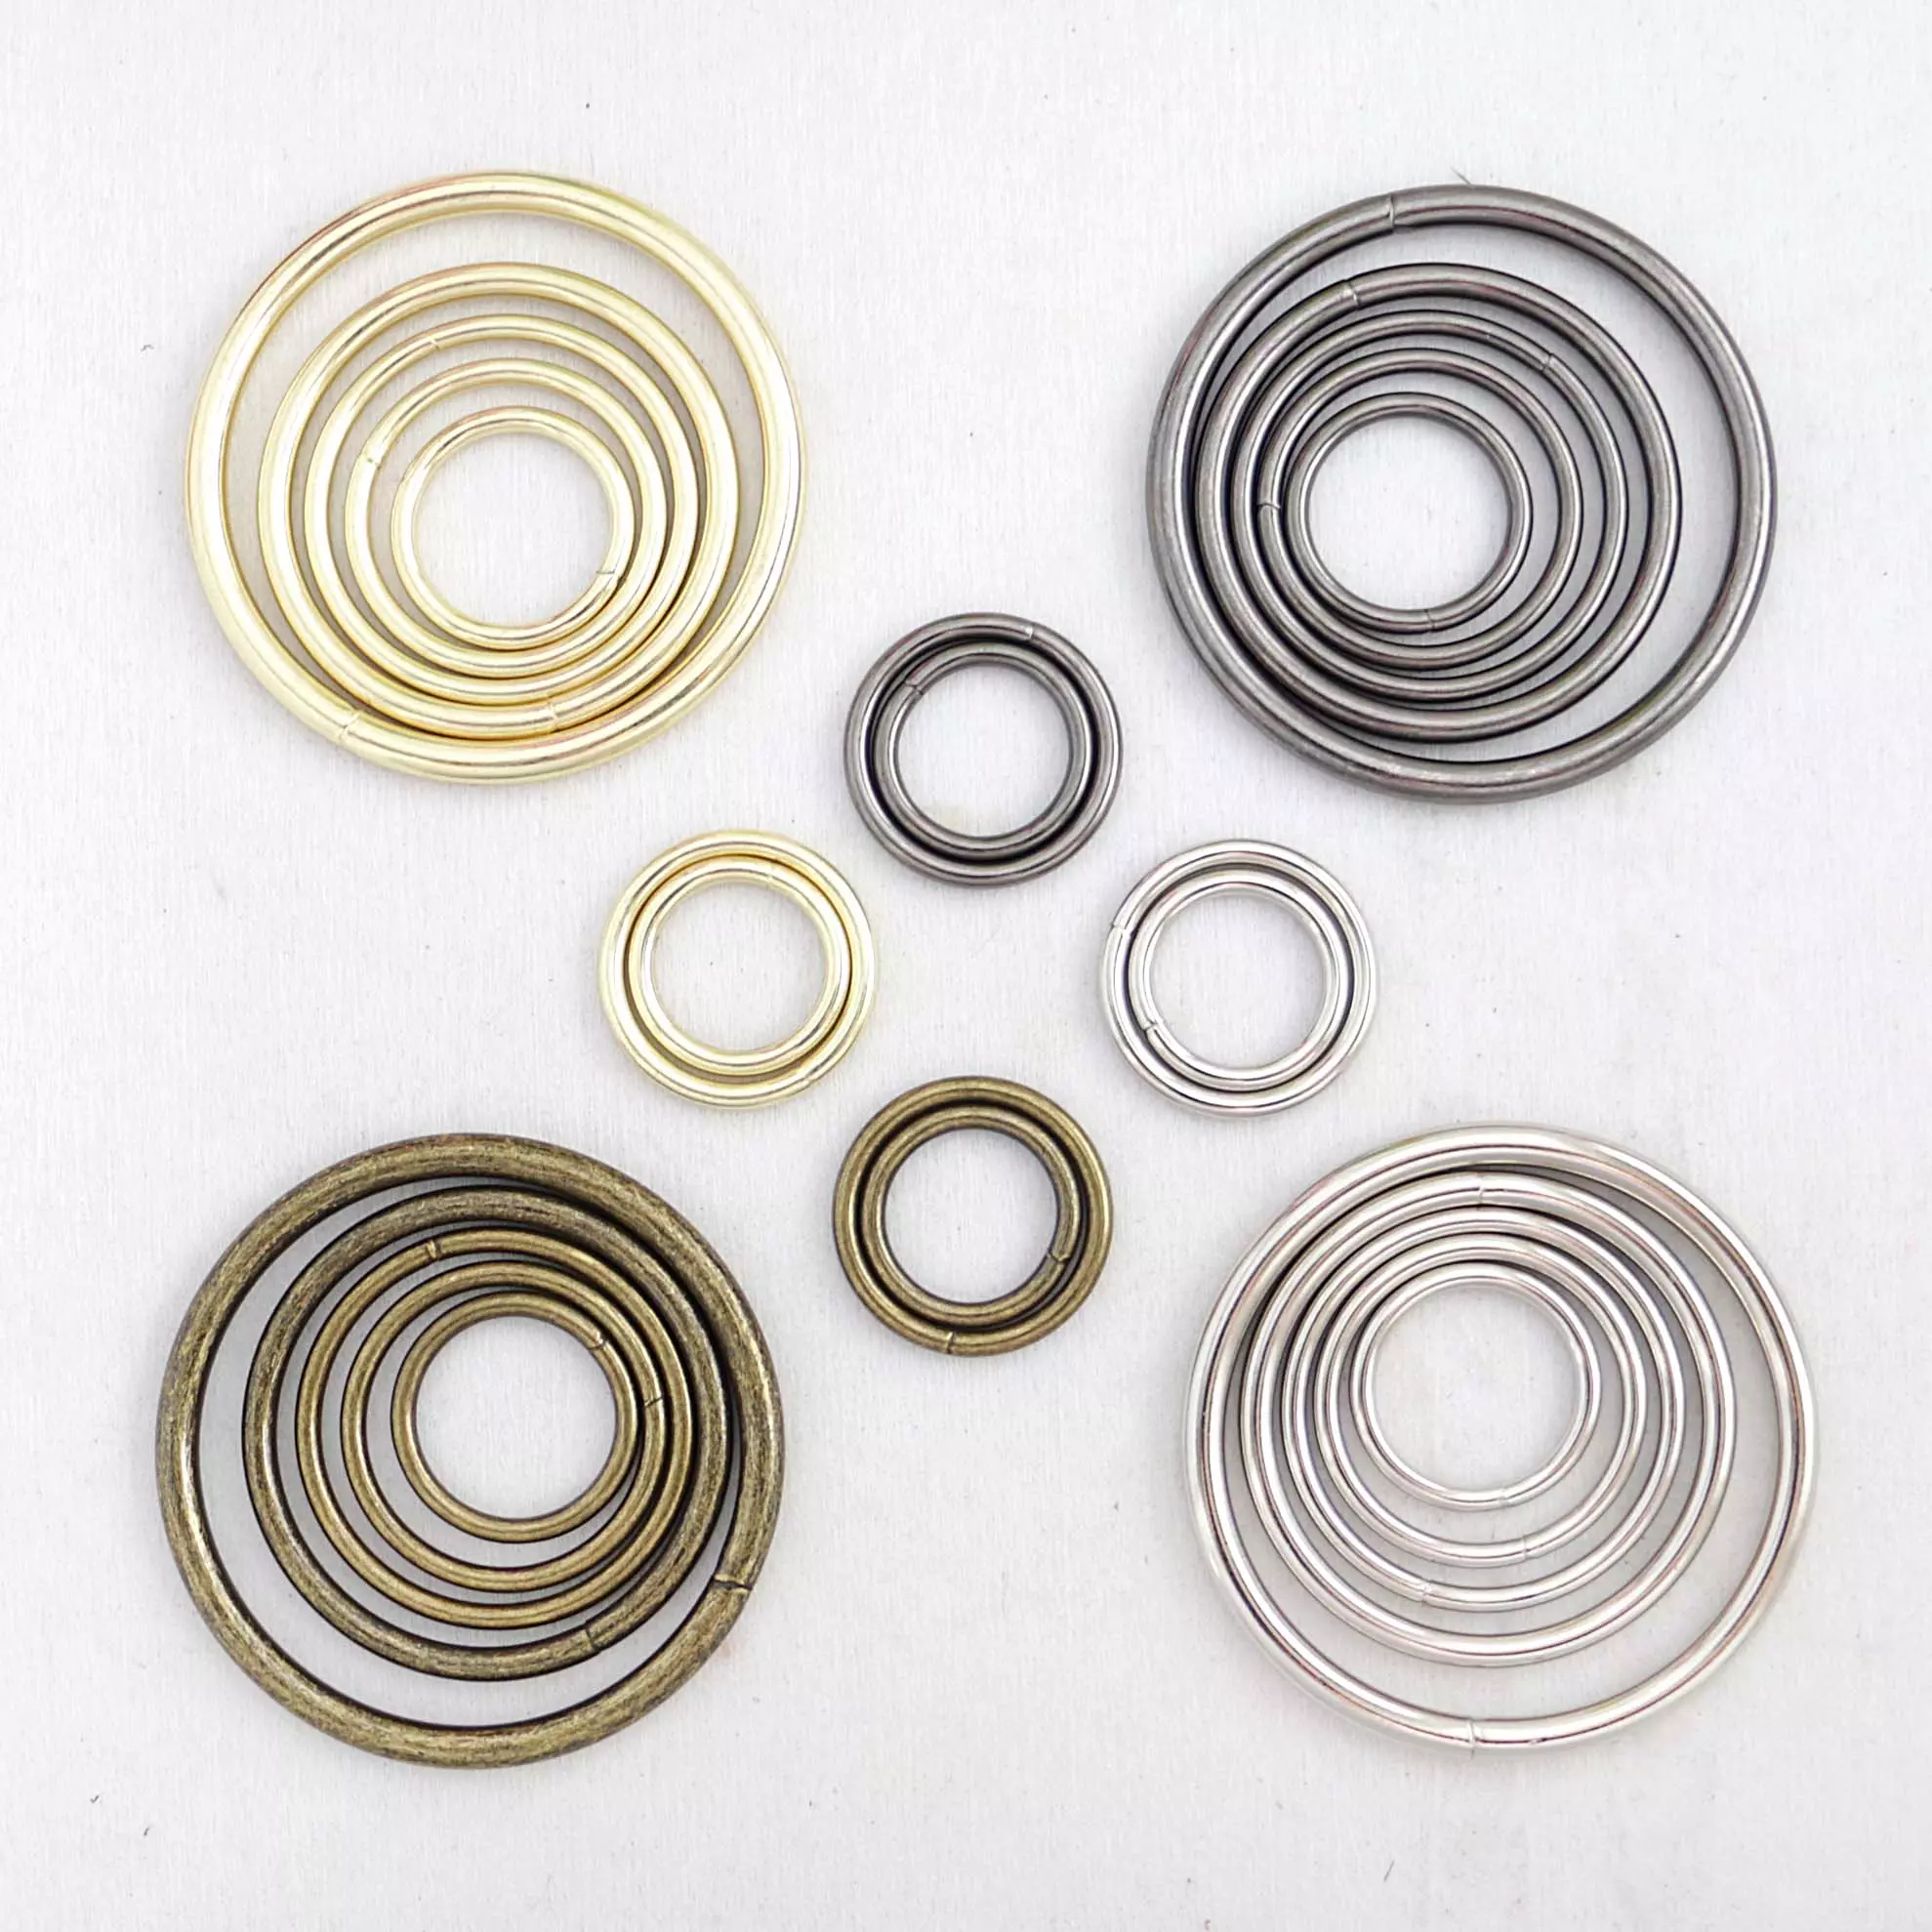 Stainless Steel D Rings for Purse Making and Sewing Projects